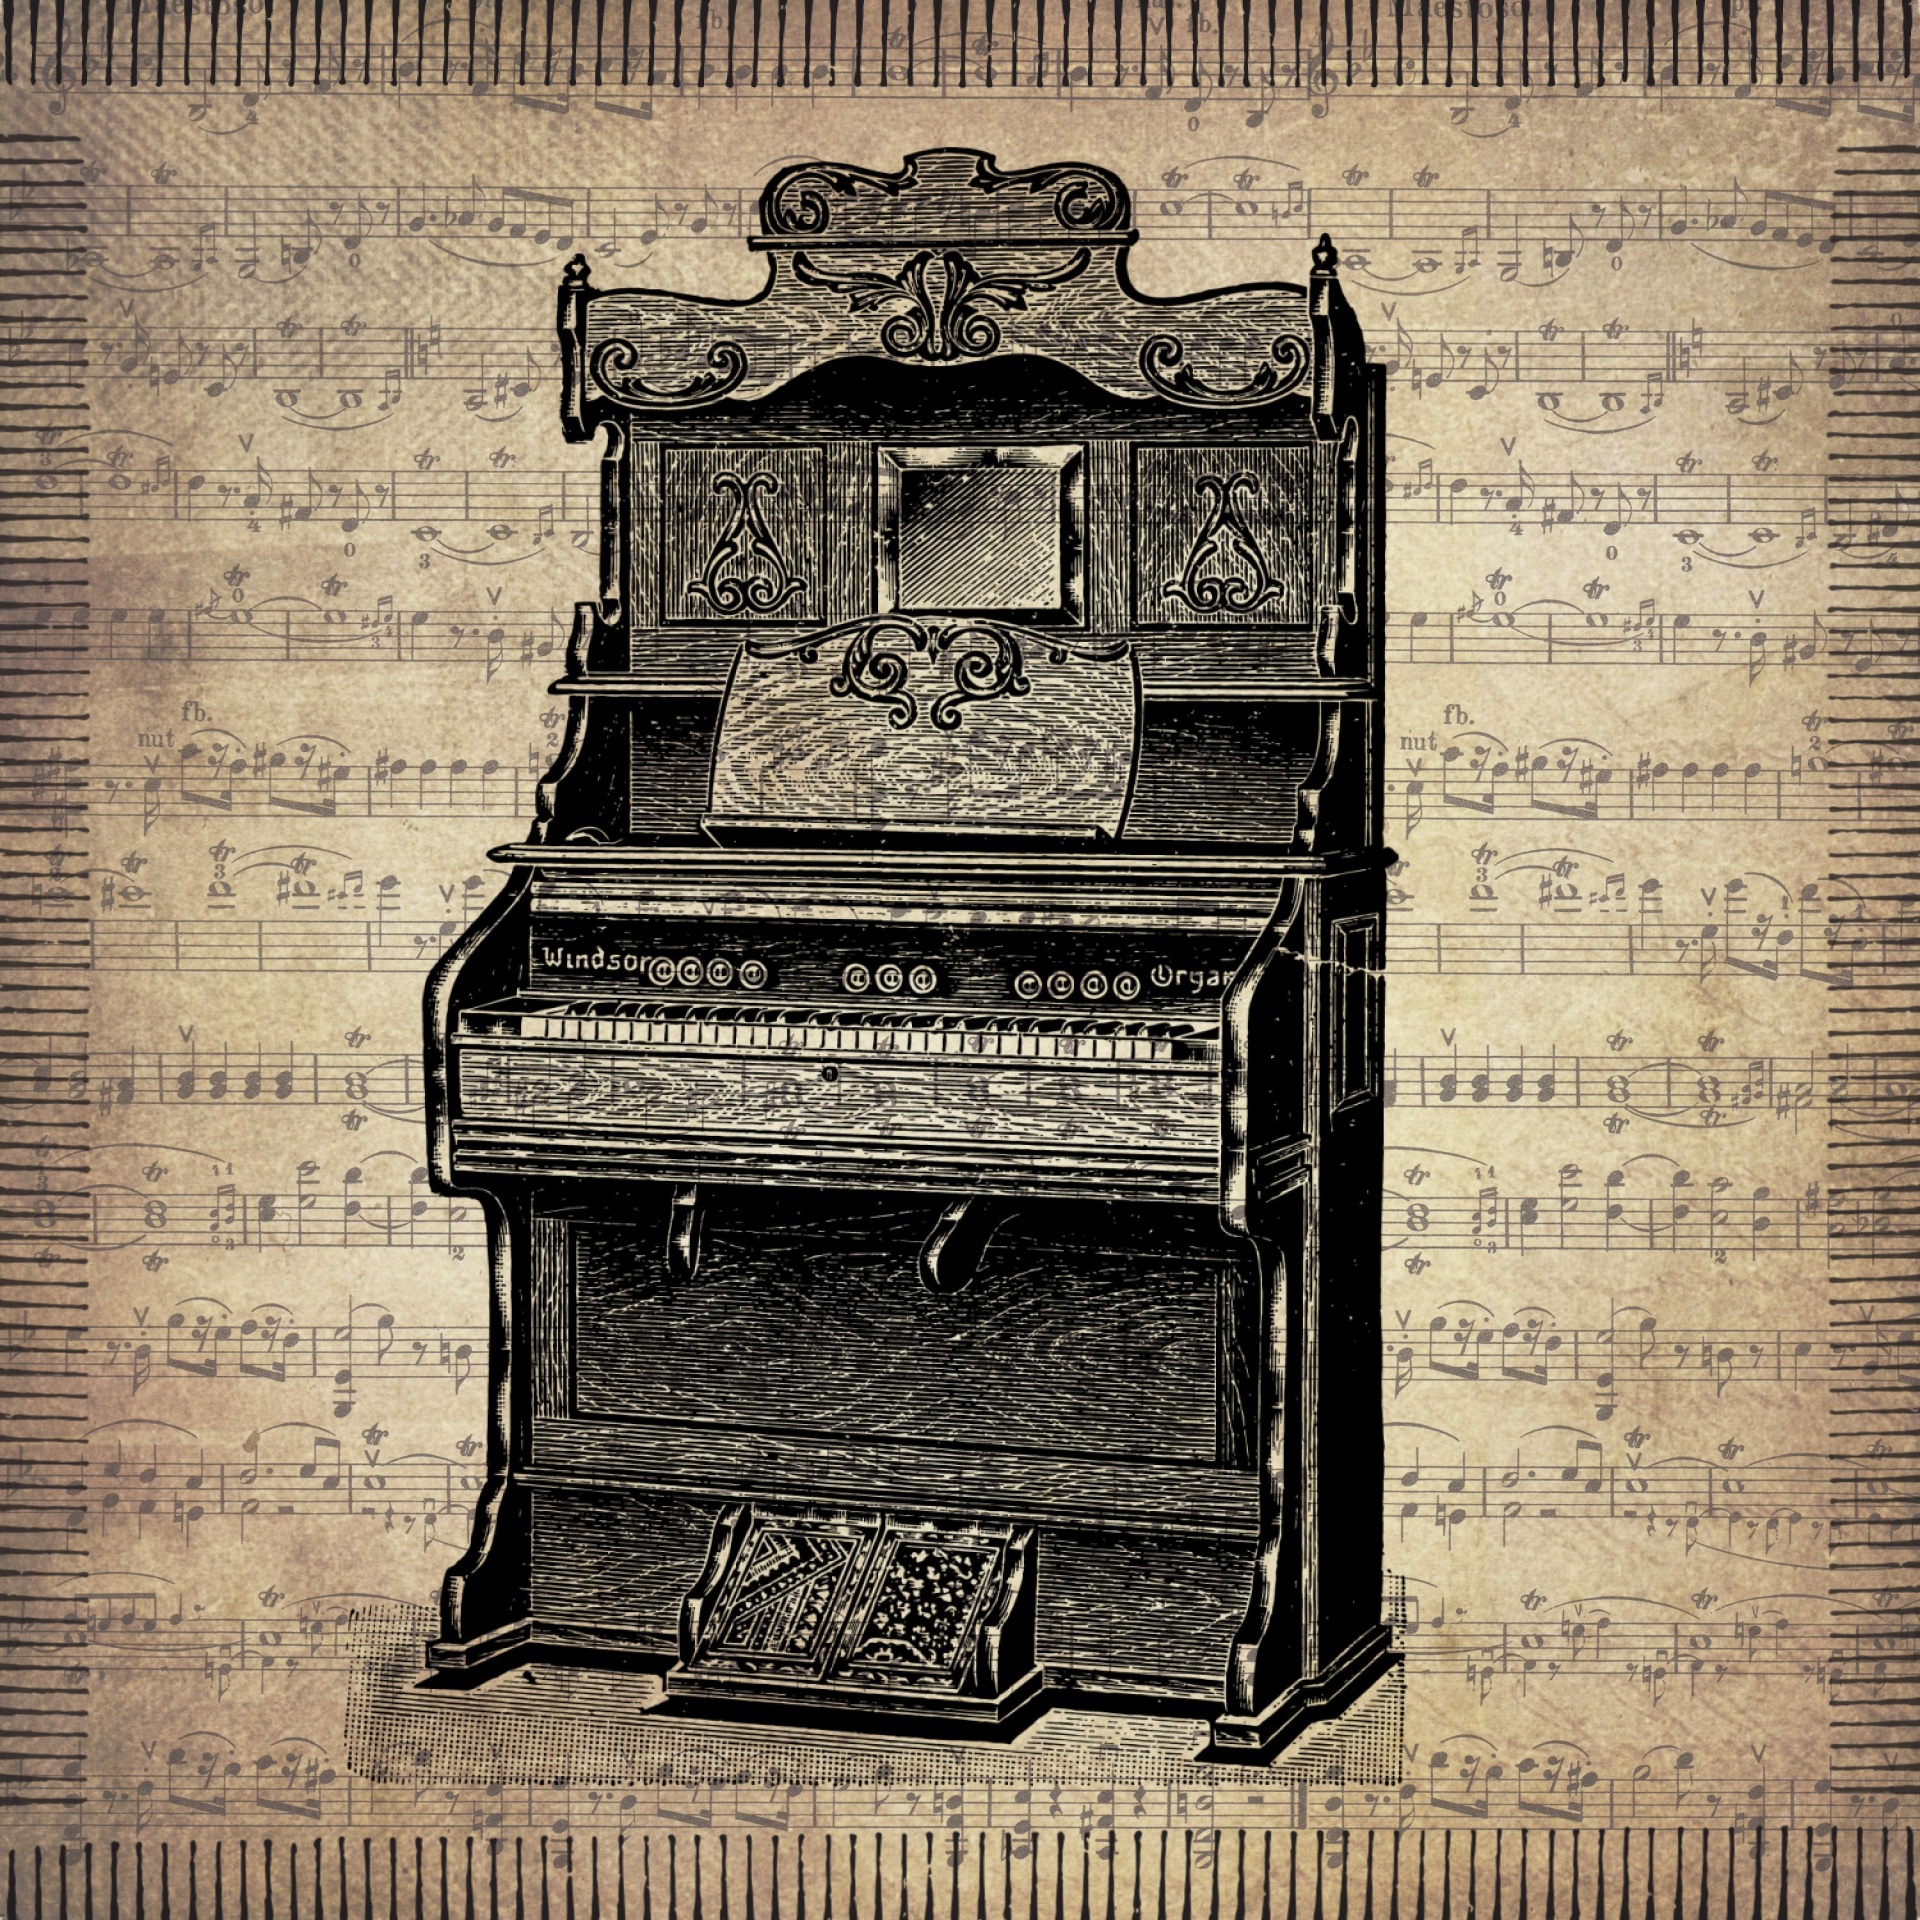 illustration of an upright piano on sheet music sepia colored background